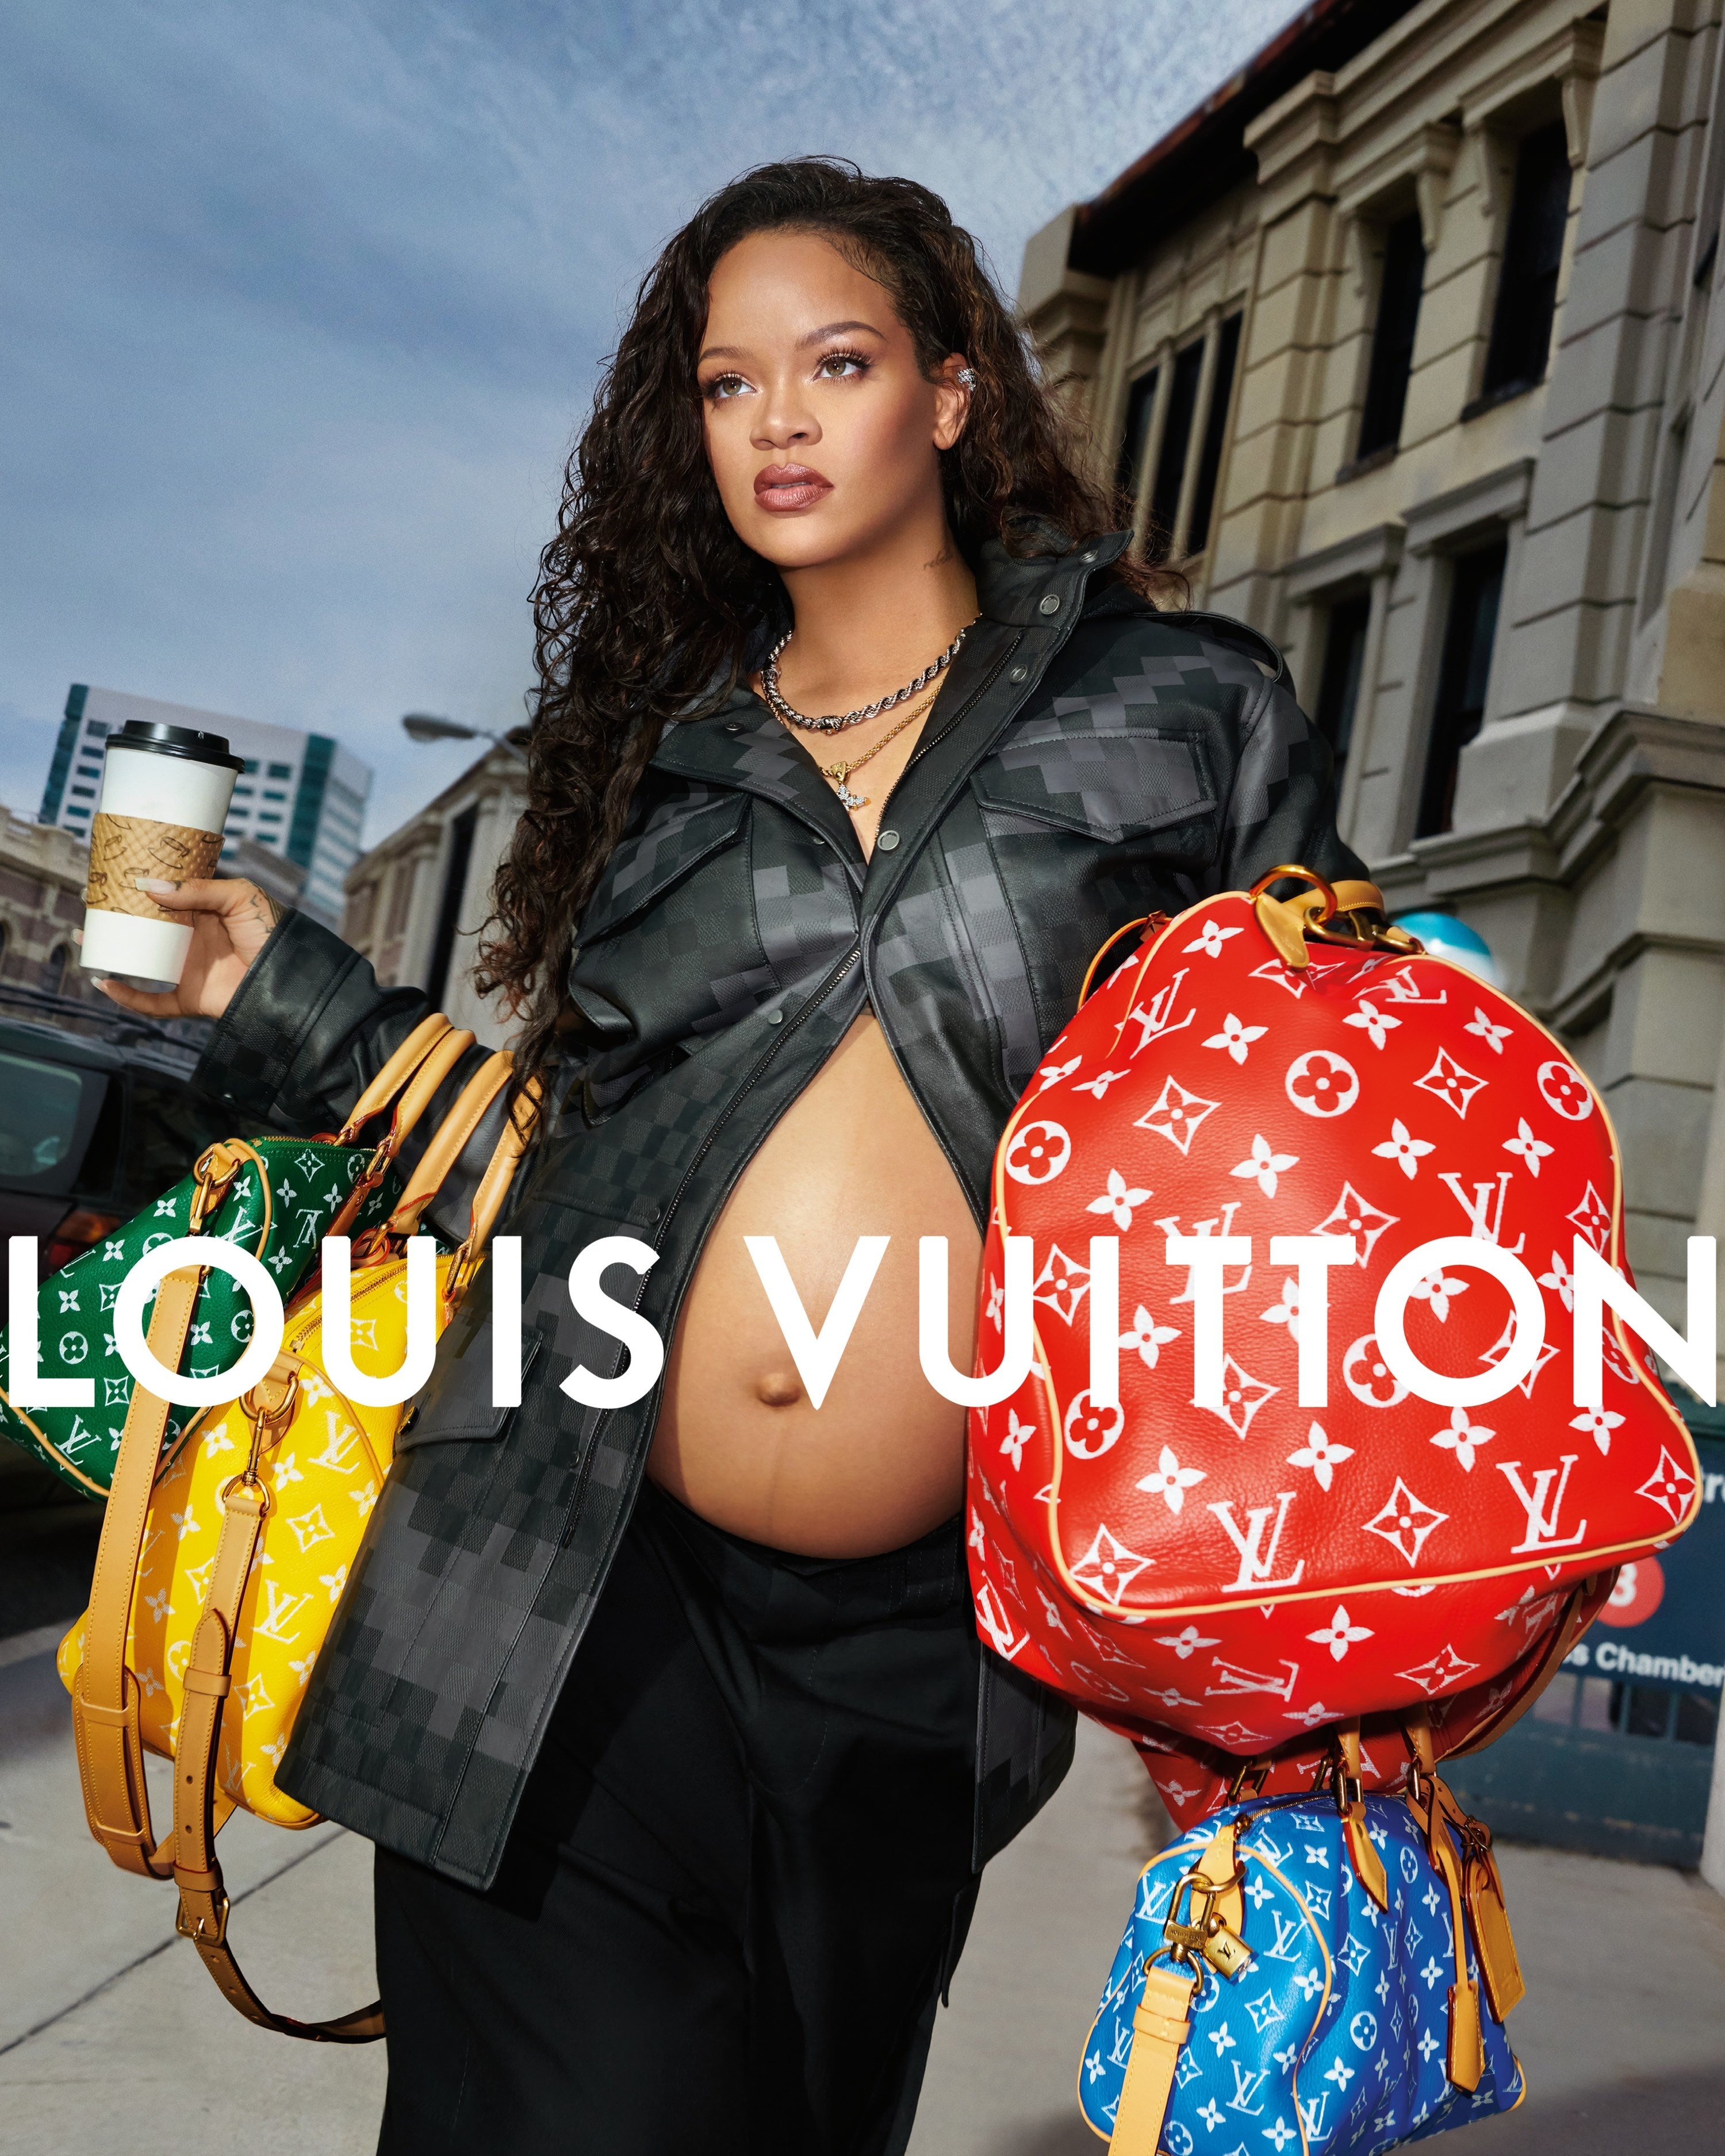 Rihanna for Louis Vuitton by Pharrell Campaign Home Decor Poster